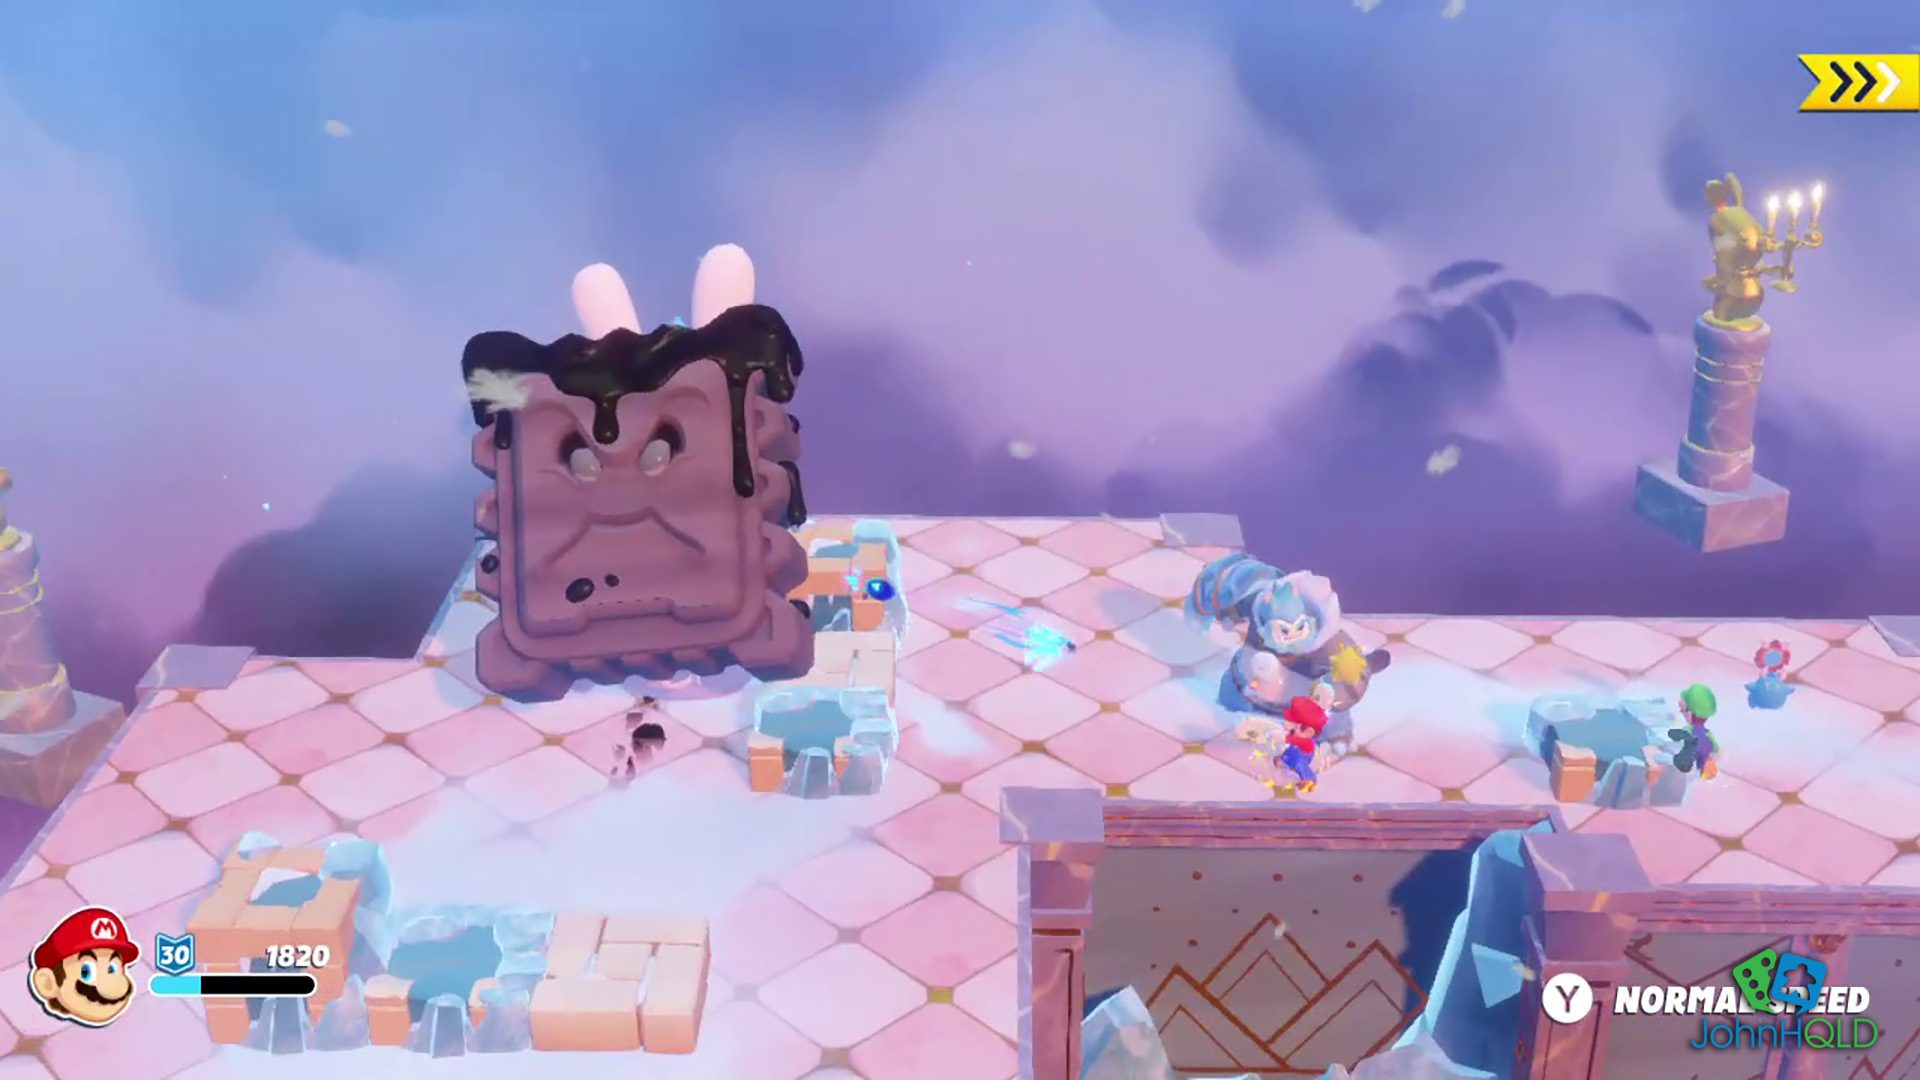 20221107 - Mario Rabbids Sparks of Hope - No grid based movement